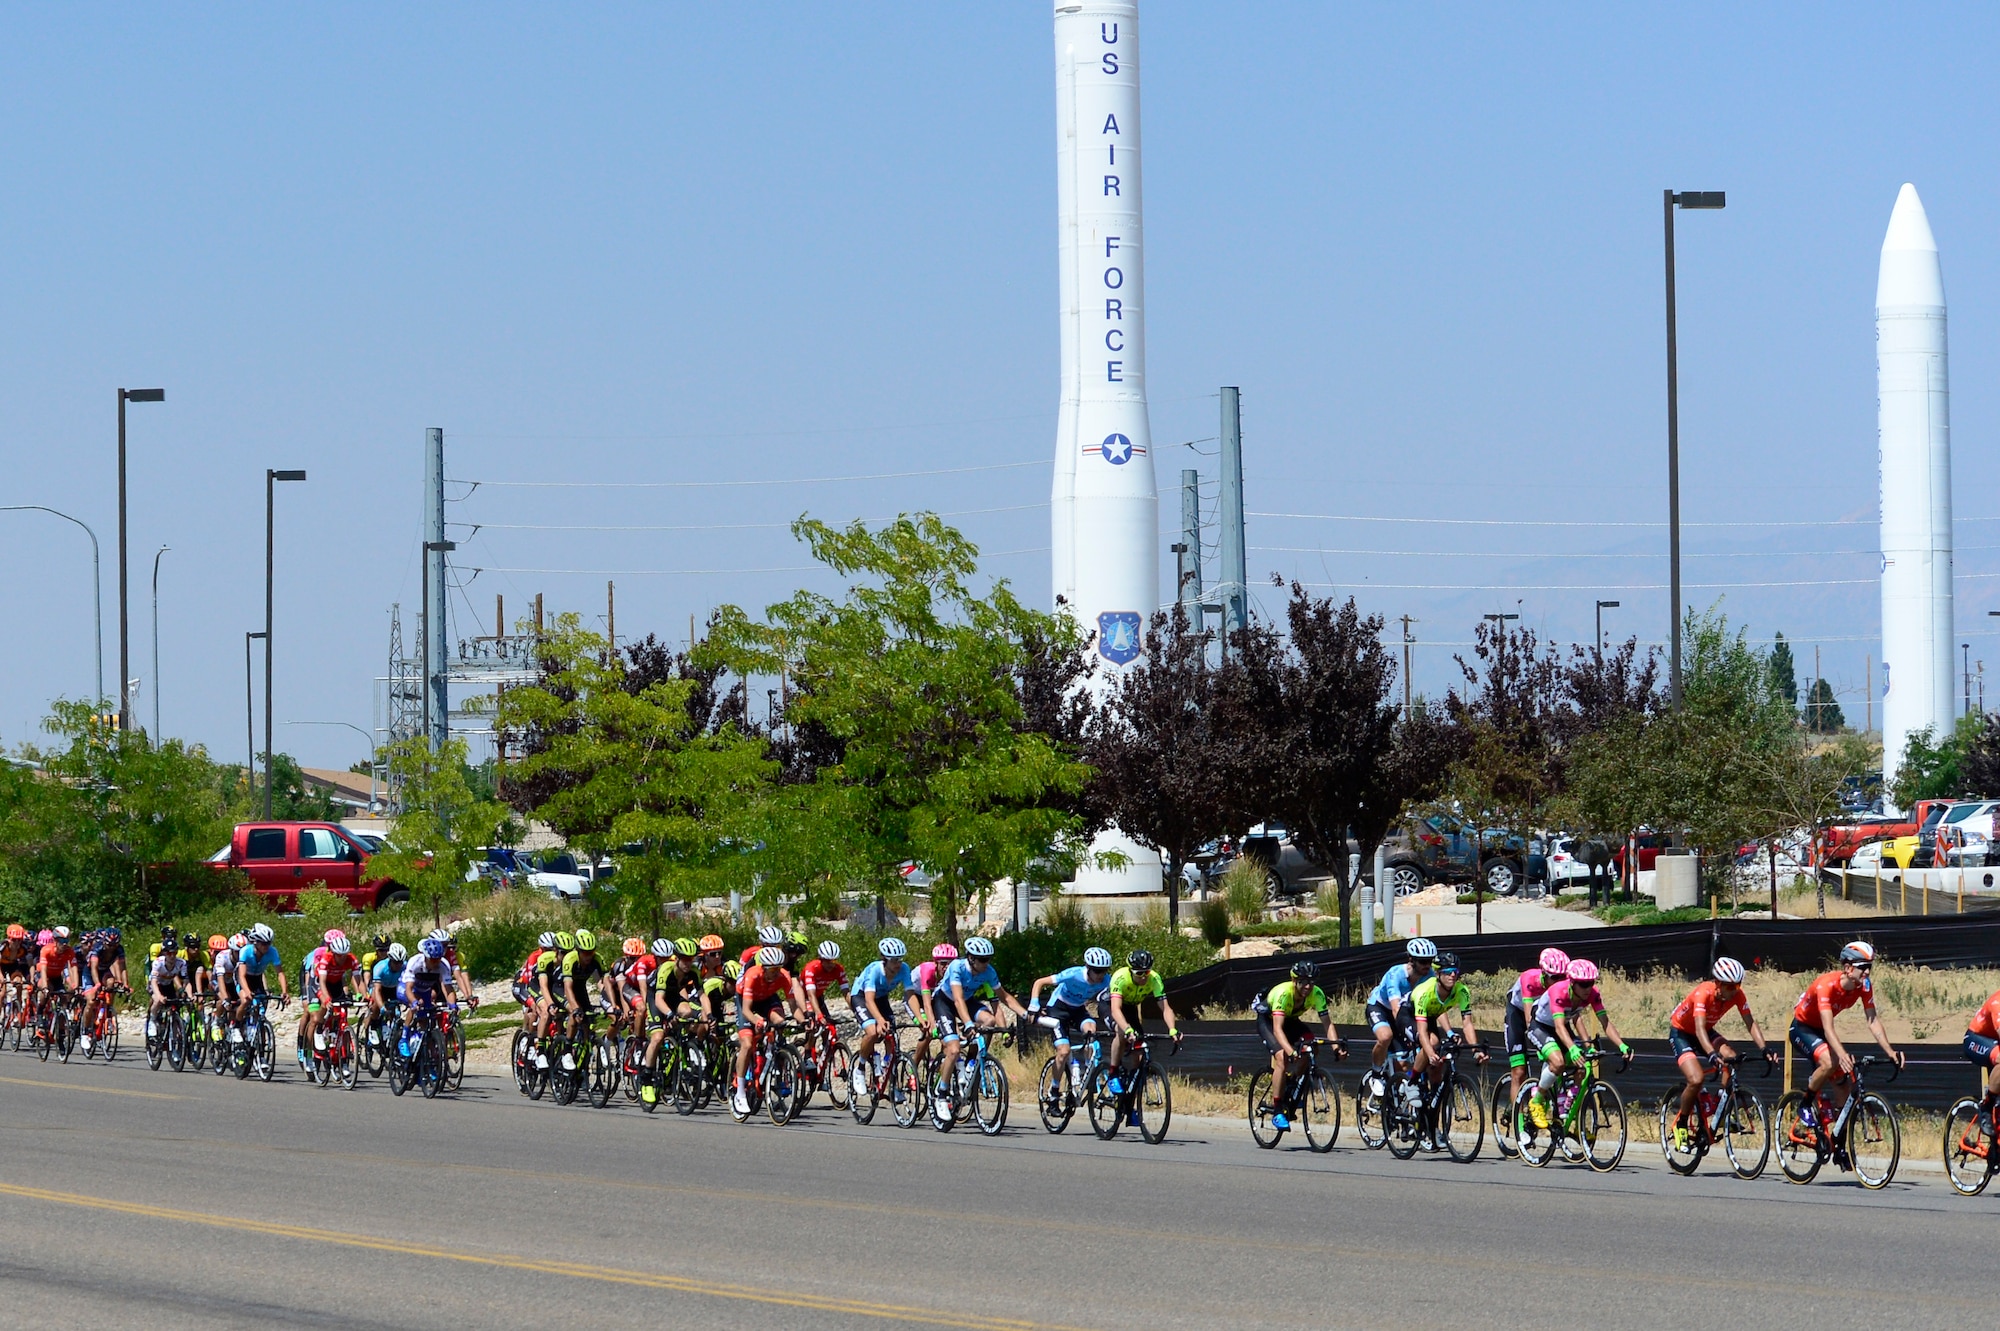 The peloton passes by a Minuteman III static display during stage 3 of the 2018 Tour of Utah road race Aug. 9, 2018, at Hill Air Force Base, Utah. The Tour of Utah is one of the top professional cycling events in the country and showcases some of the world’s best teams and cyclists. Stage 3 of the multiday race took riders on a 116-mile route from Antelope Island to Layton and included a loop through the installation. (U.S. Air Force photo by David Perry)